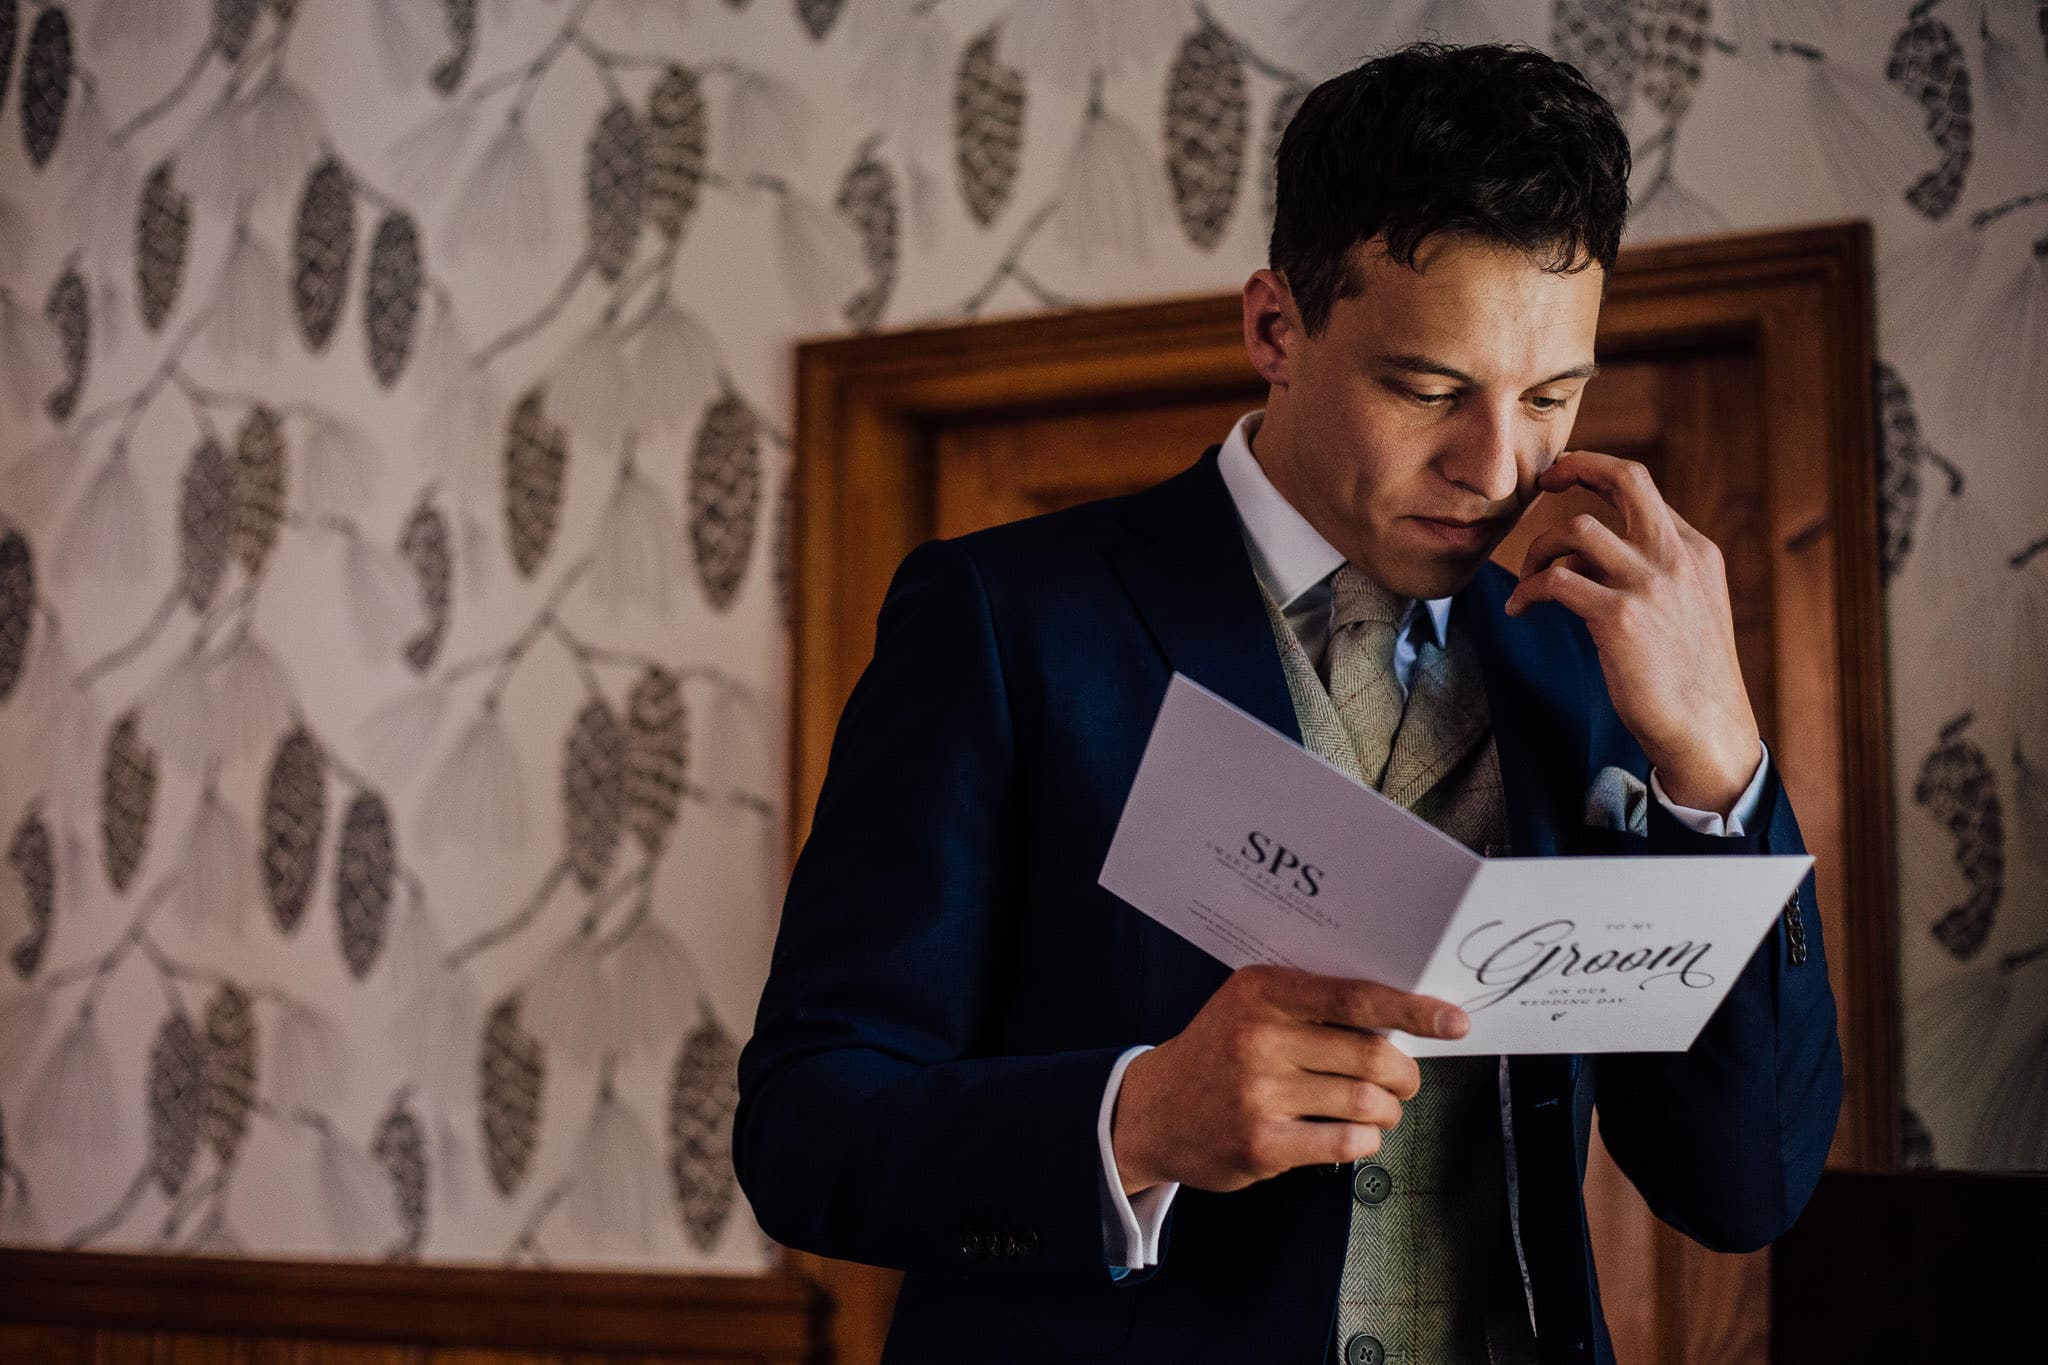 emotional groom reading card from his bride